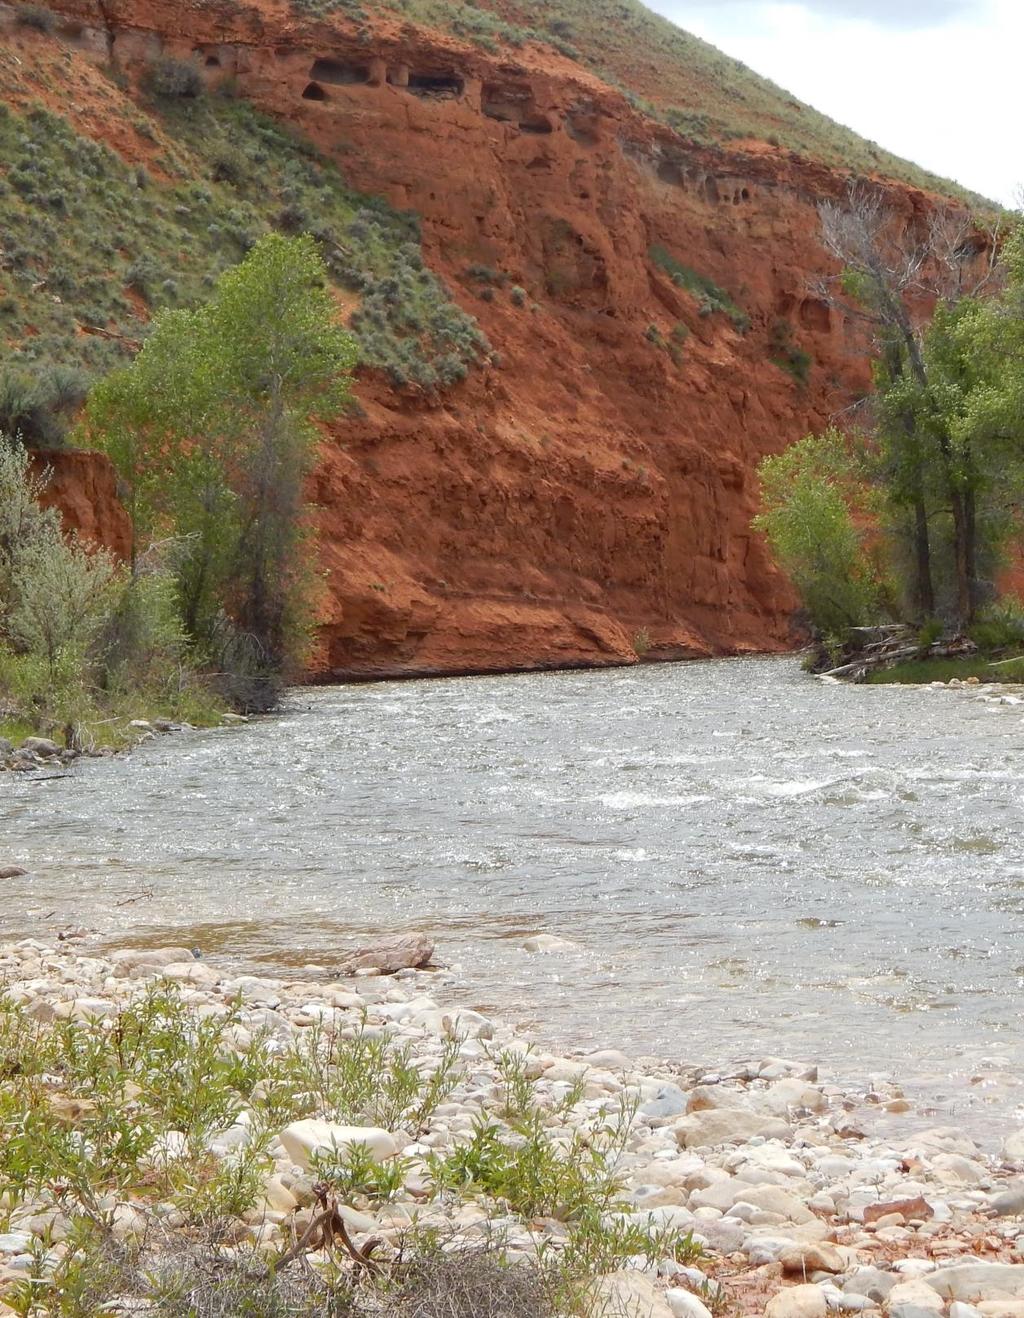 A massive red cliff rises above Shell Creek as it meanders through the property and shelters a fantastic trout fishing hole.